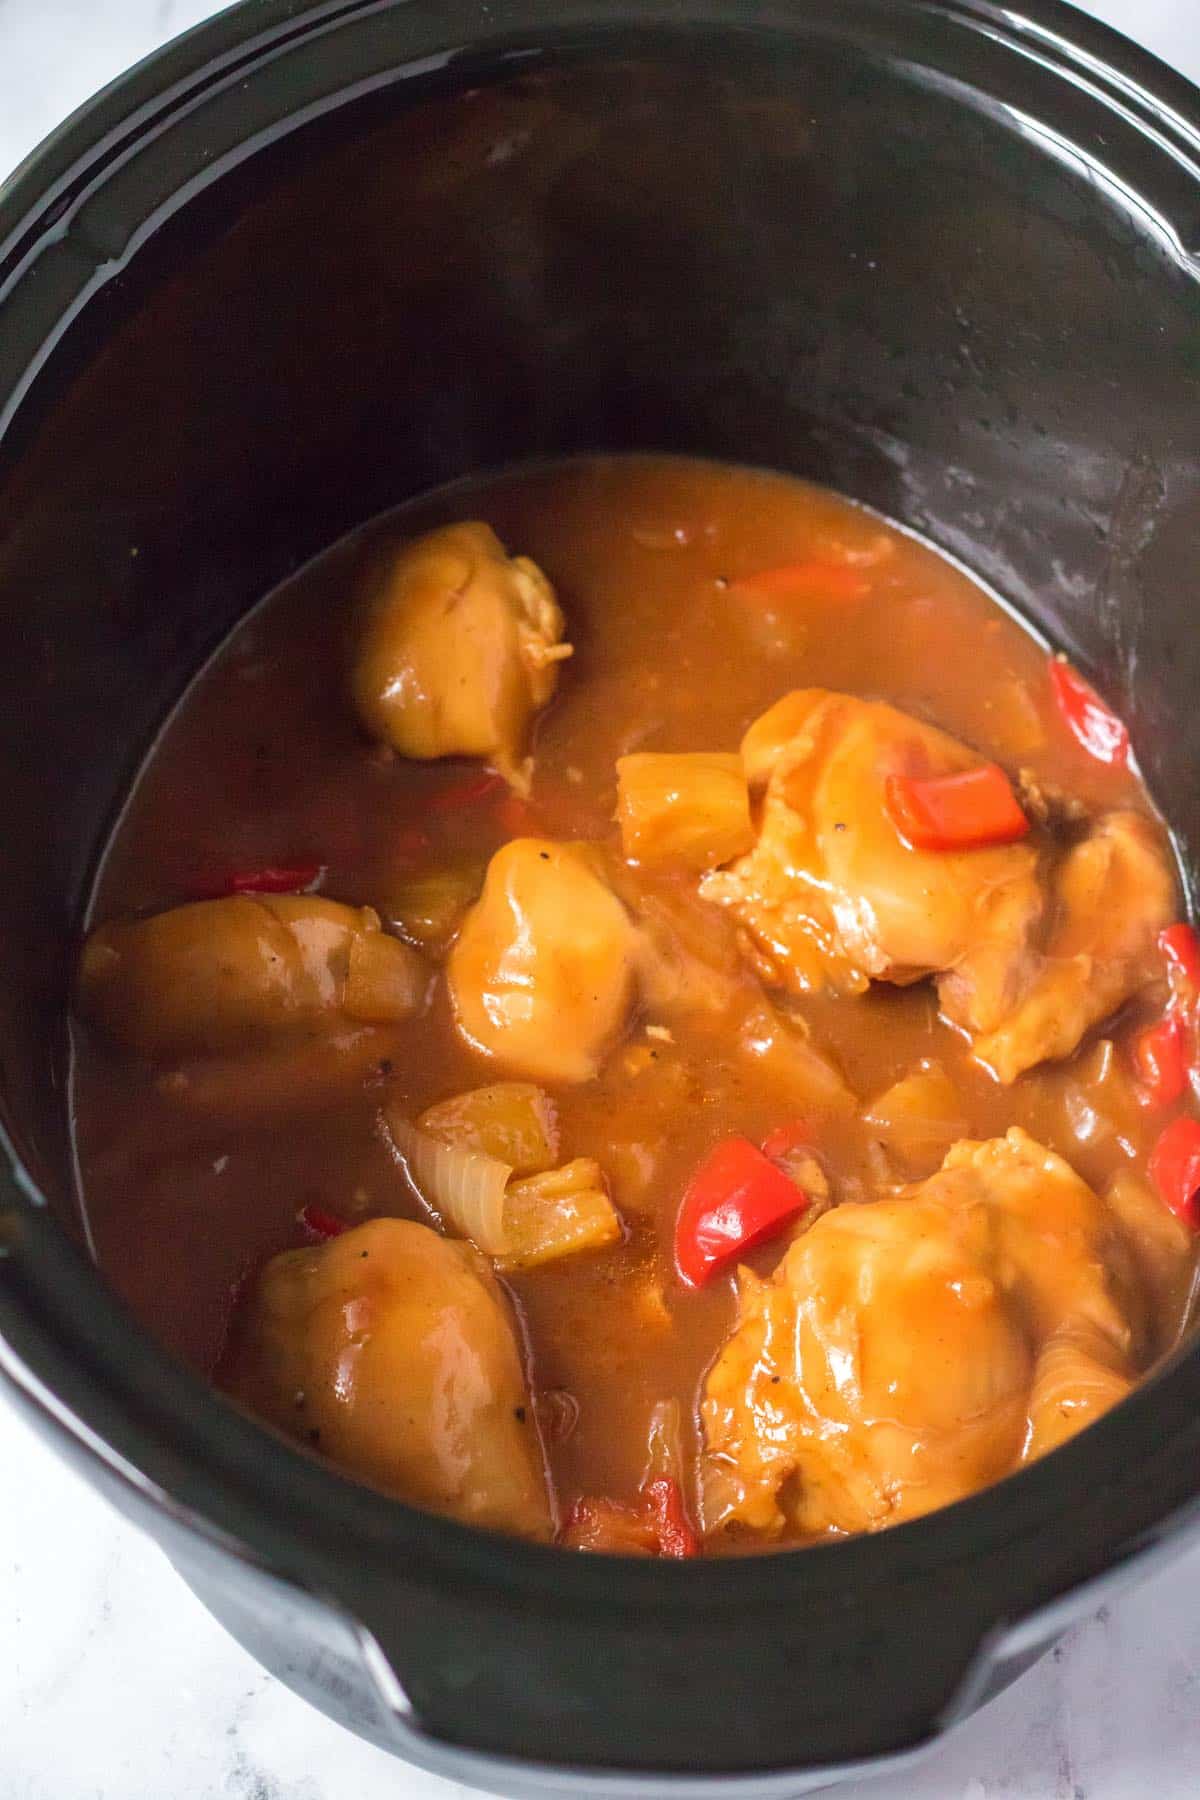 Cooked chicken, pineapple and peppers in the slow cooker.